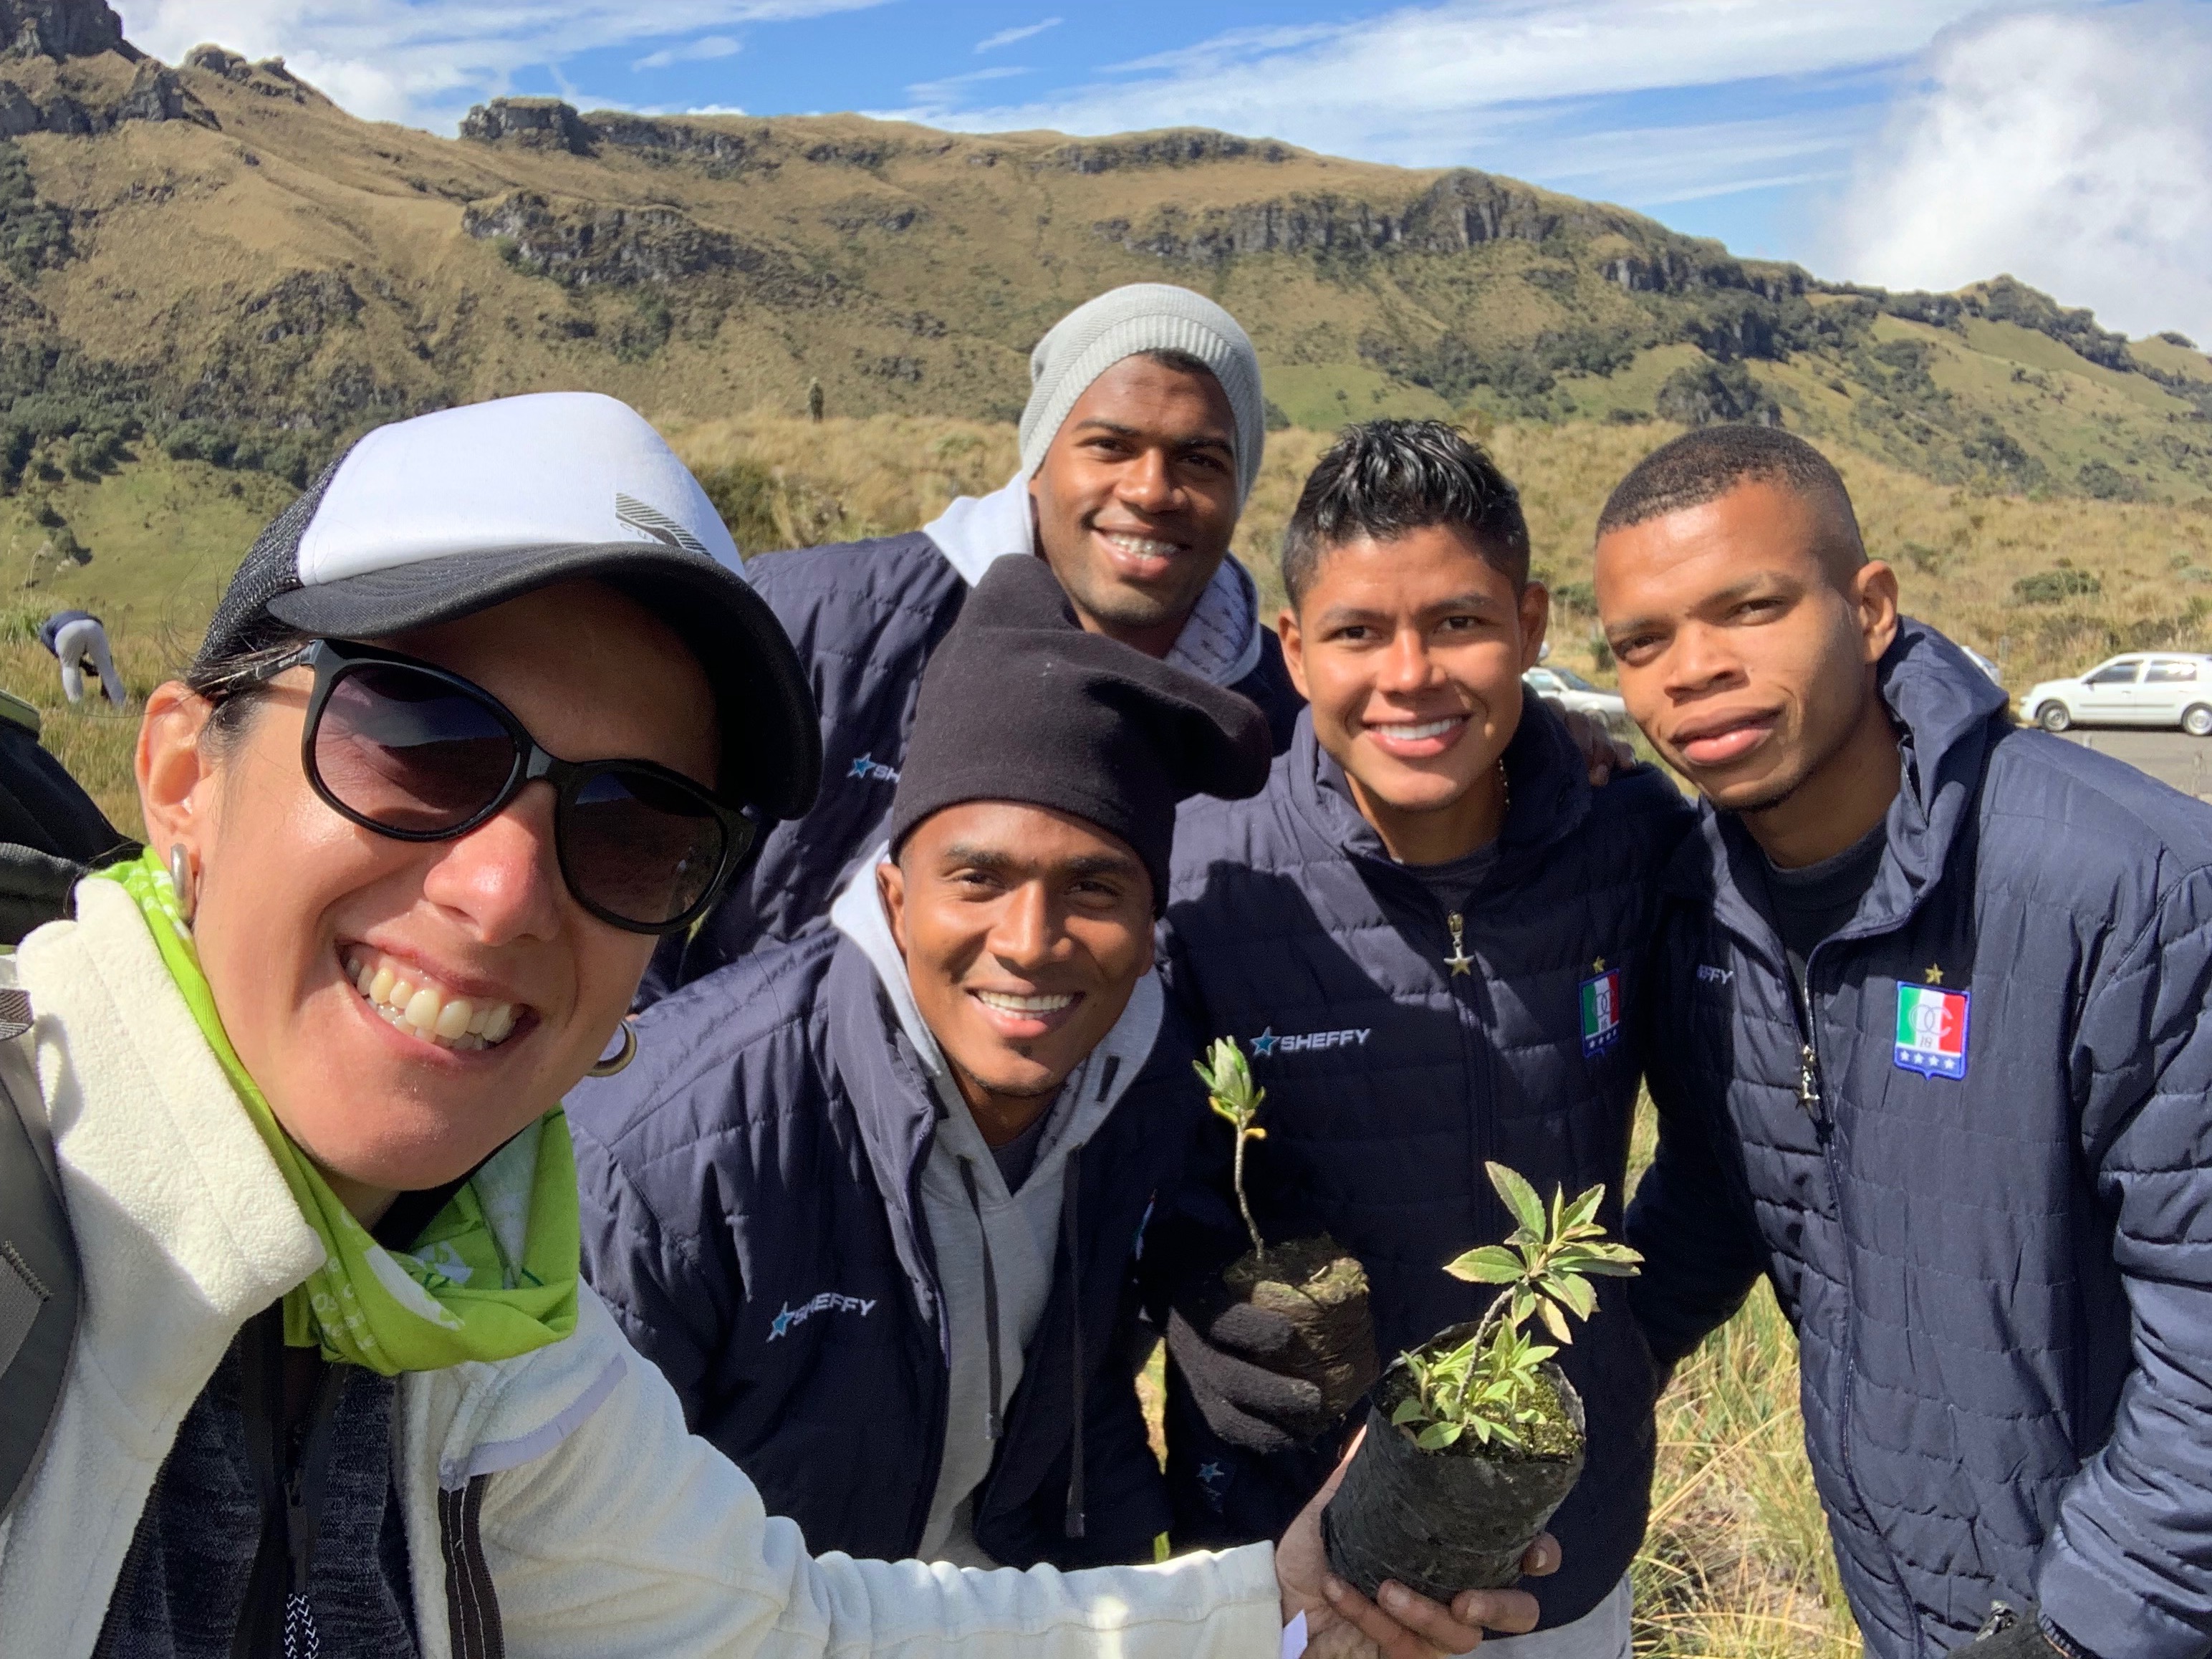 Members of the Colombian national soccer team helped the research team plant trees in Colombia.